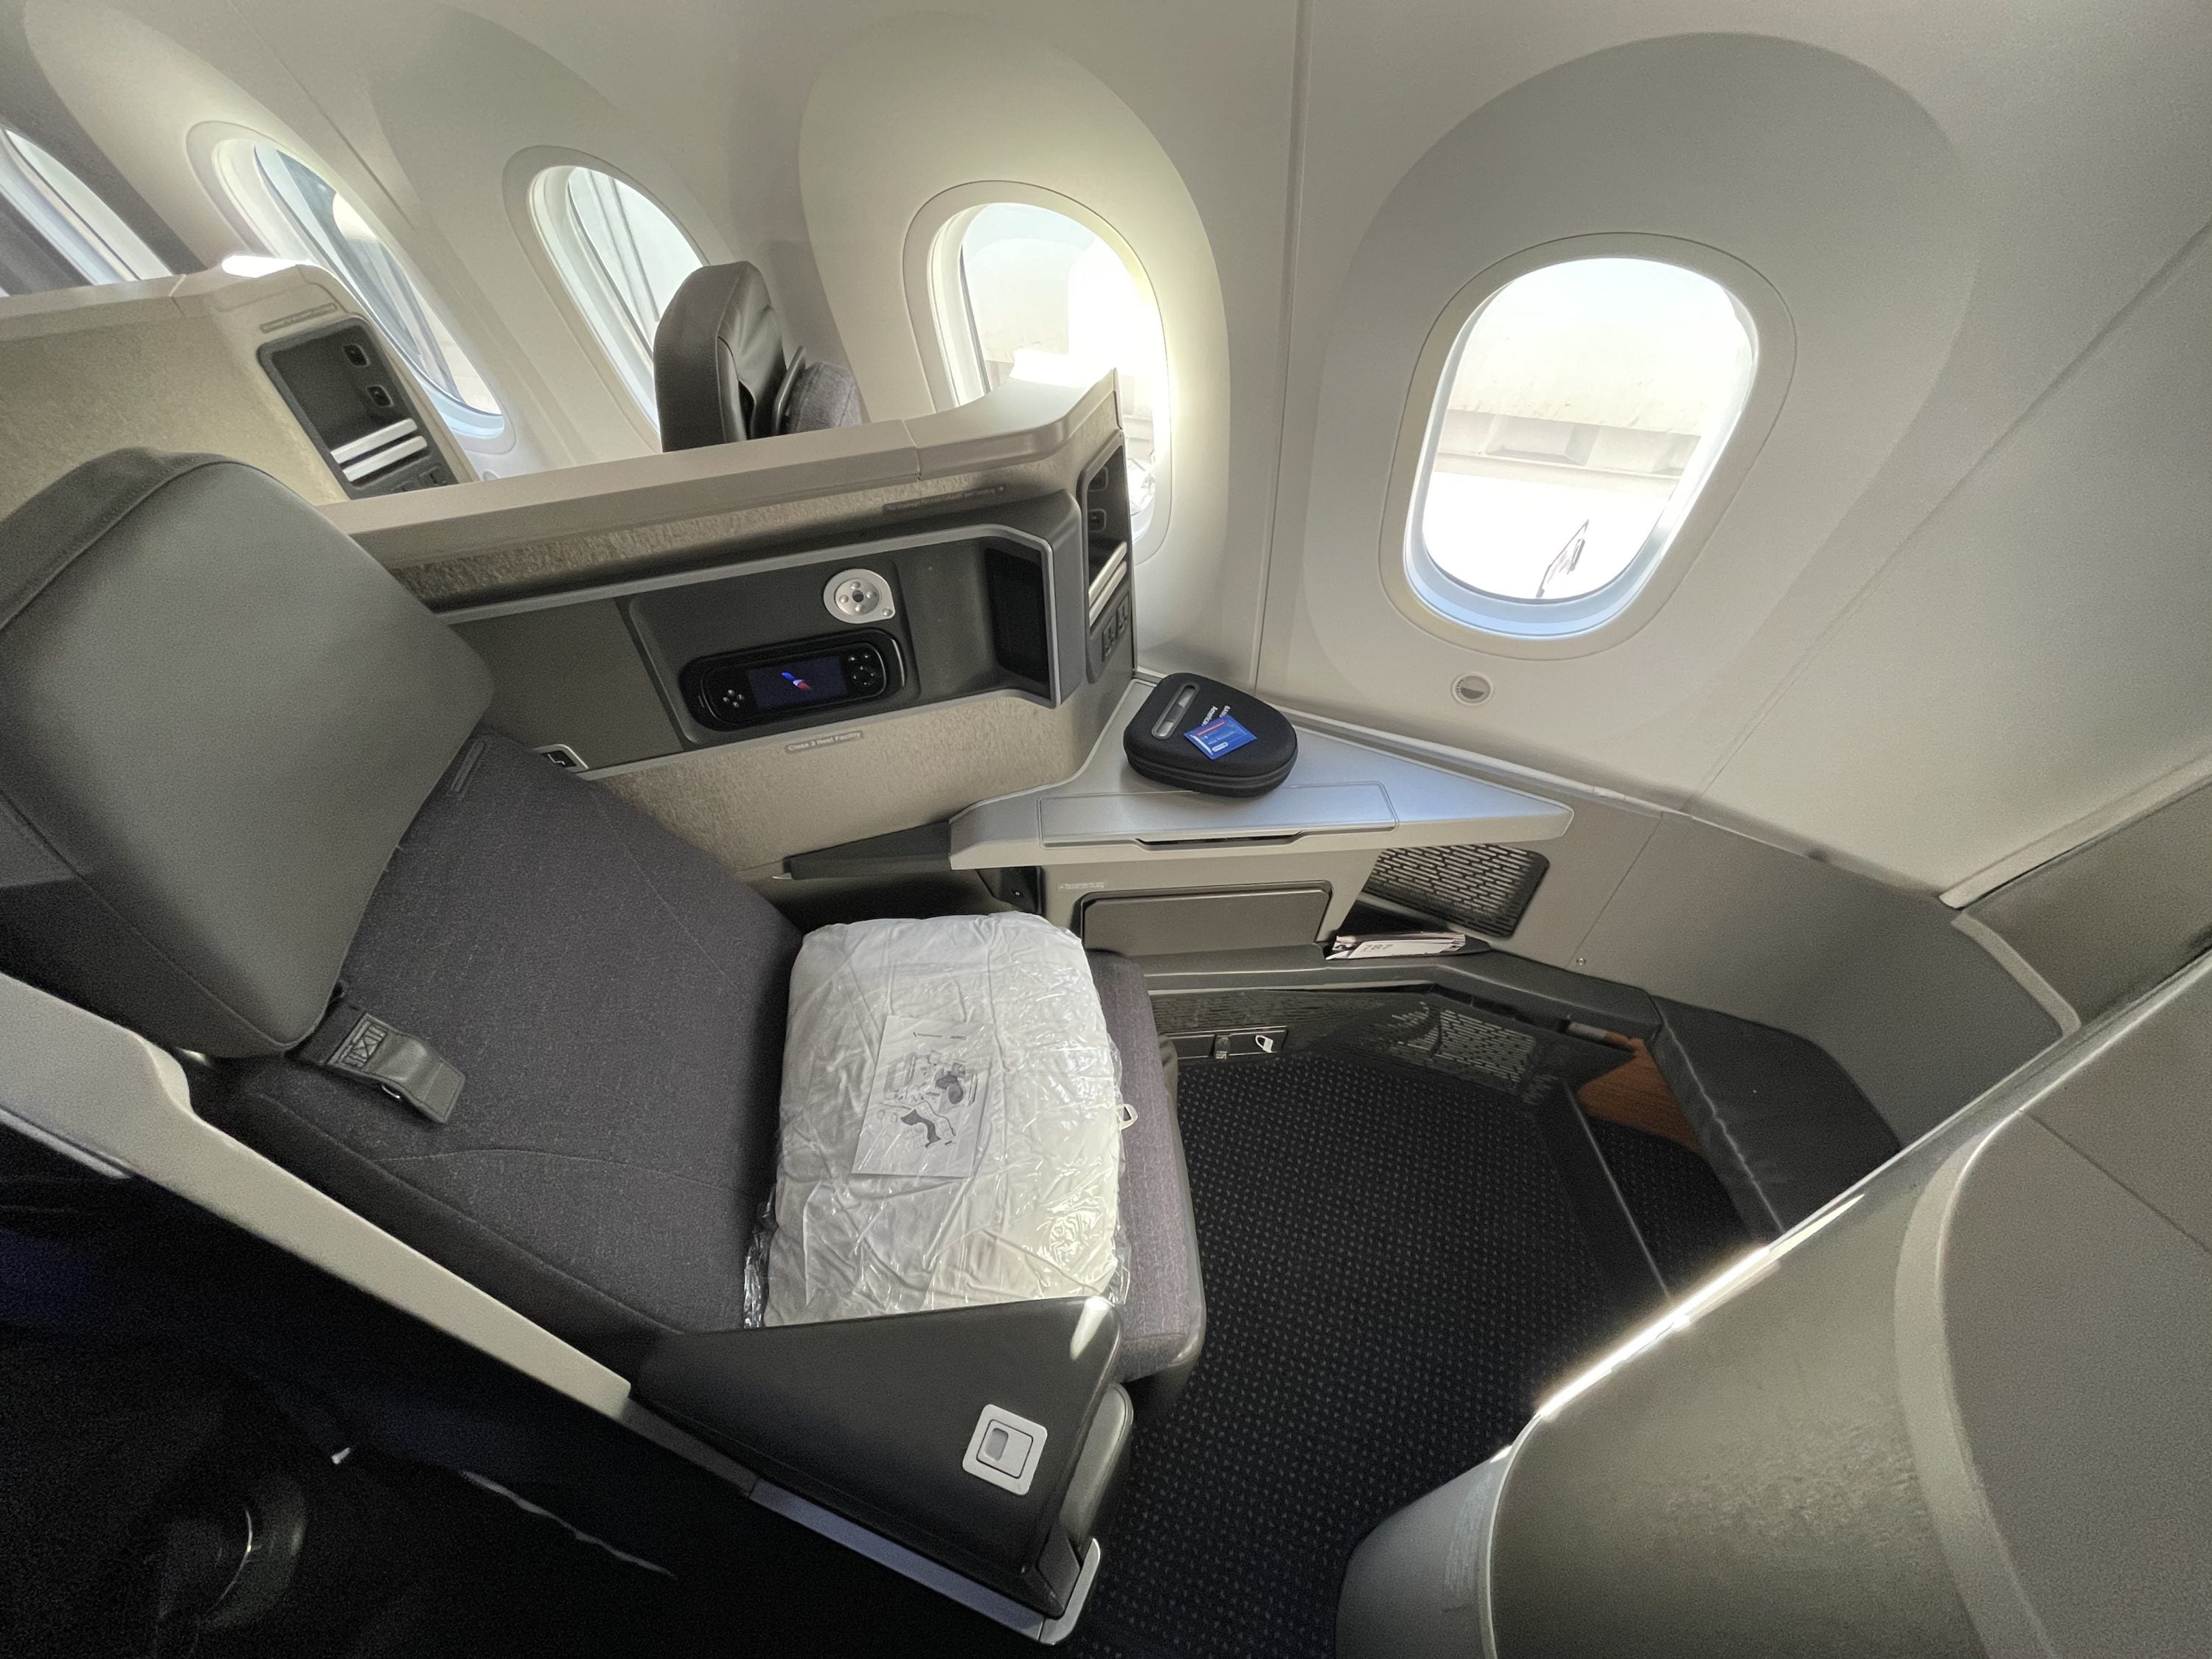 American Airlines 787 Business Class Seat Wide Angle